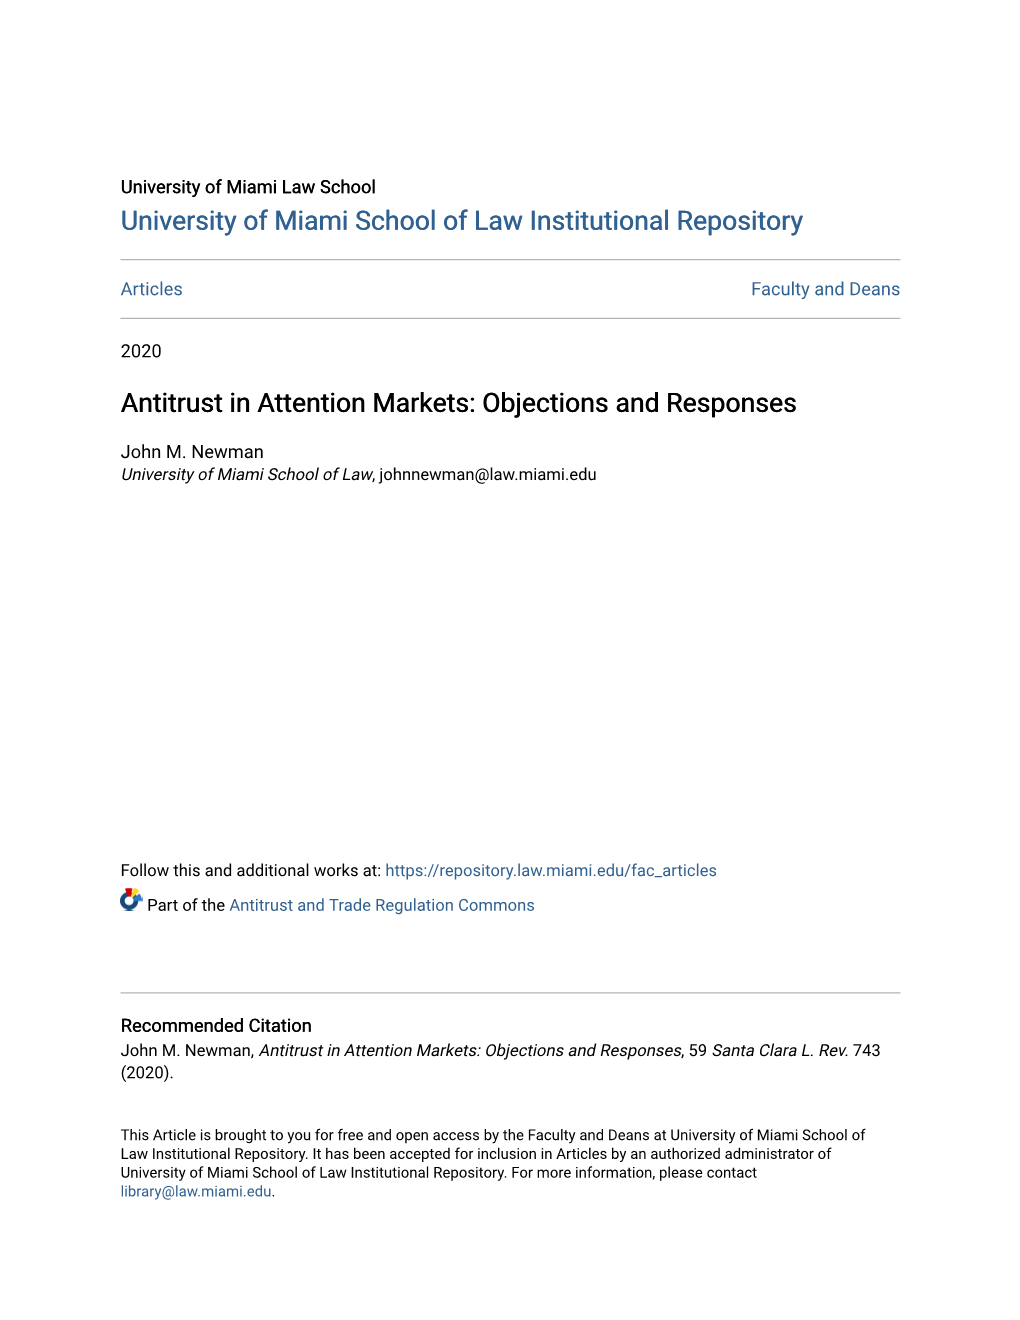 Antitrust in Attention Markets: Objections and Responses